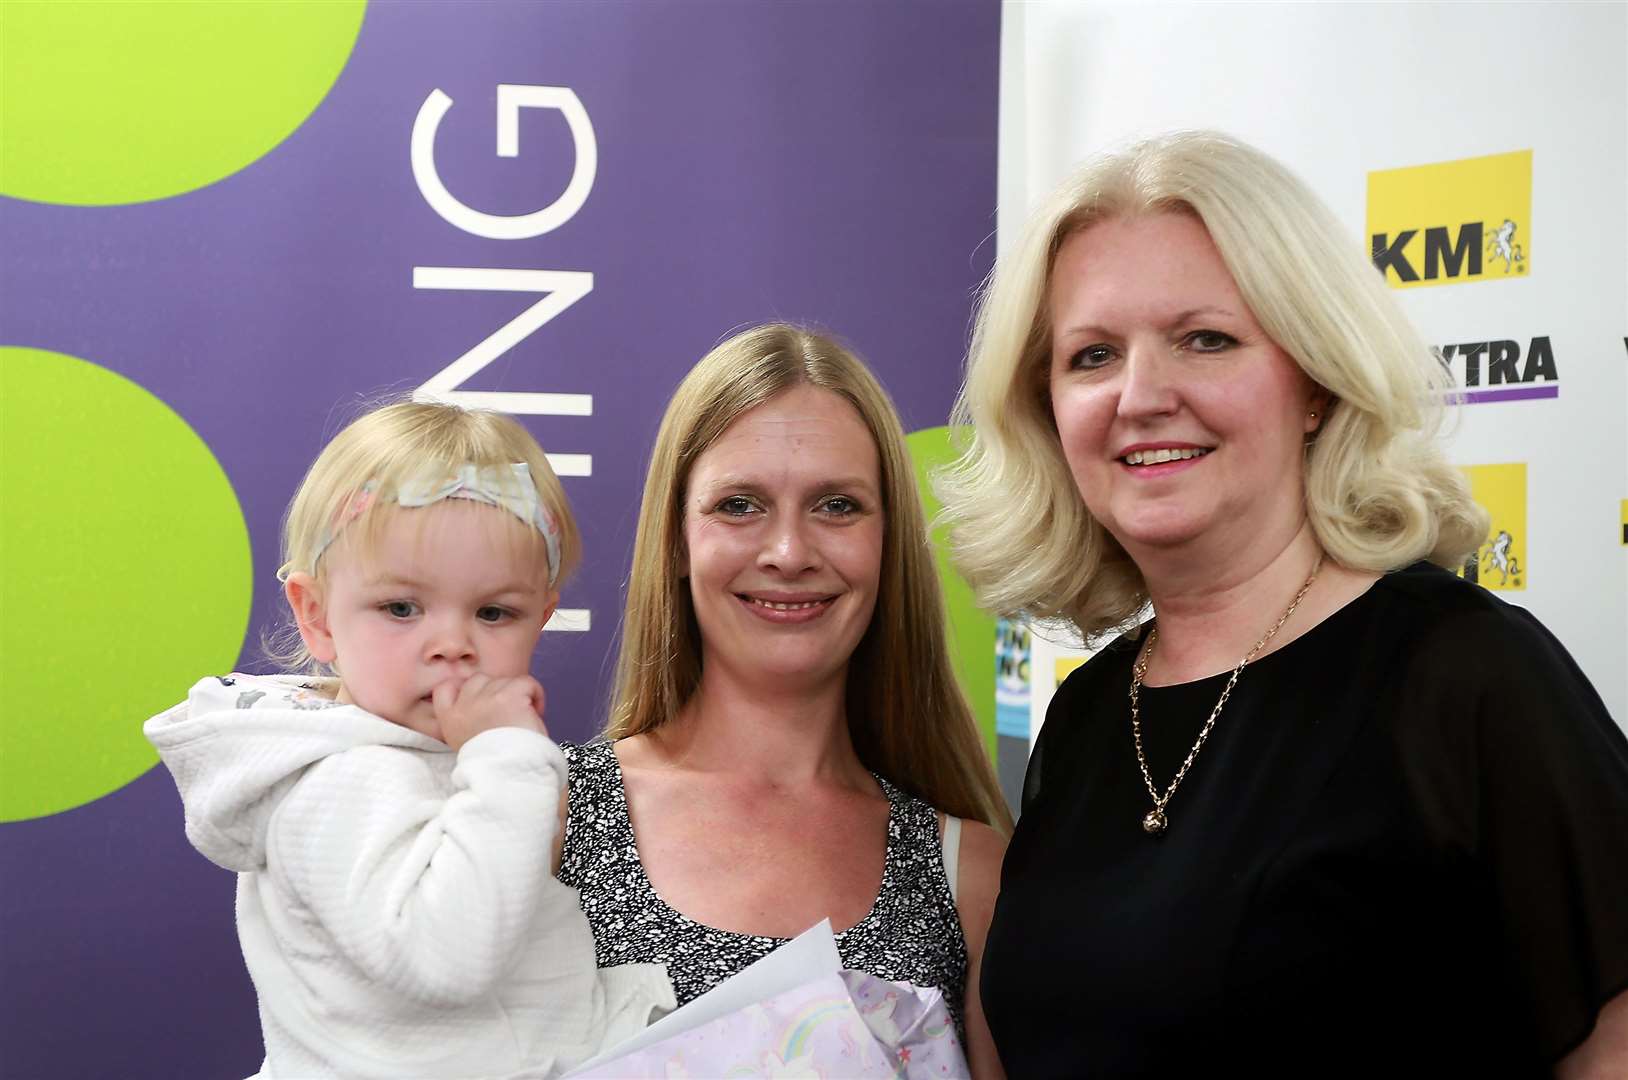 Orchards Shopping Centre Dartford by centre manager Debbie Carey with winner Lily Leggett and her mother Sarah Kingman